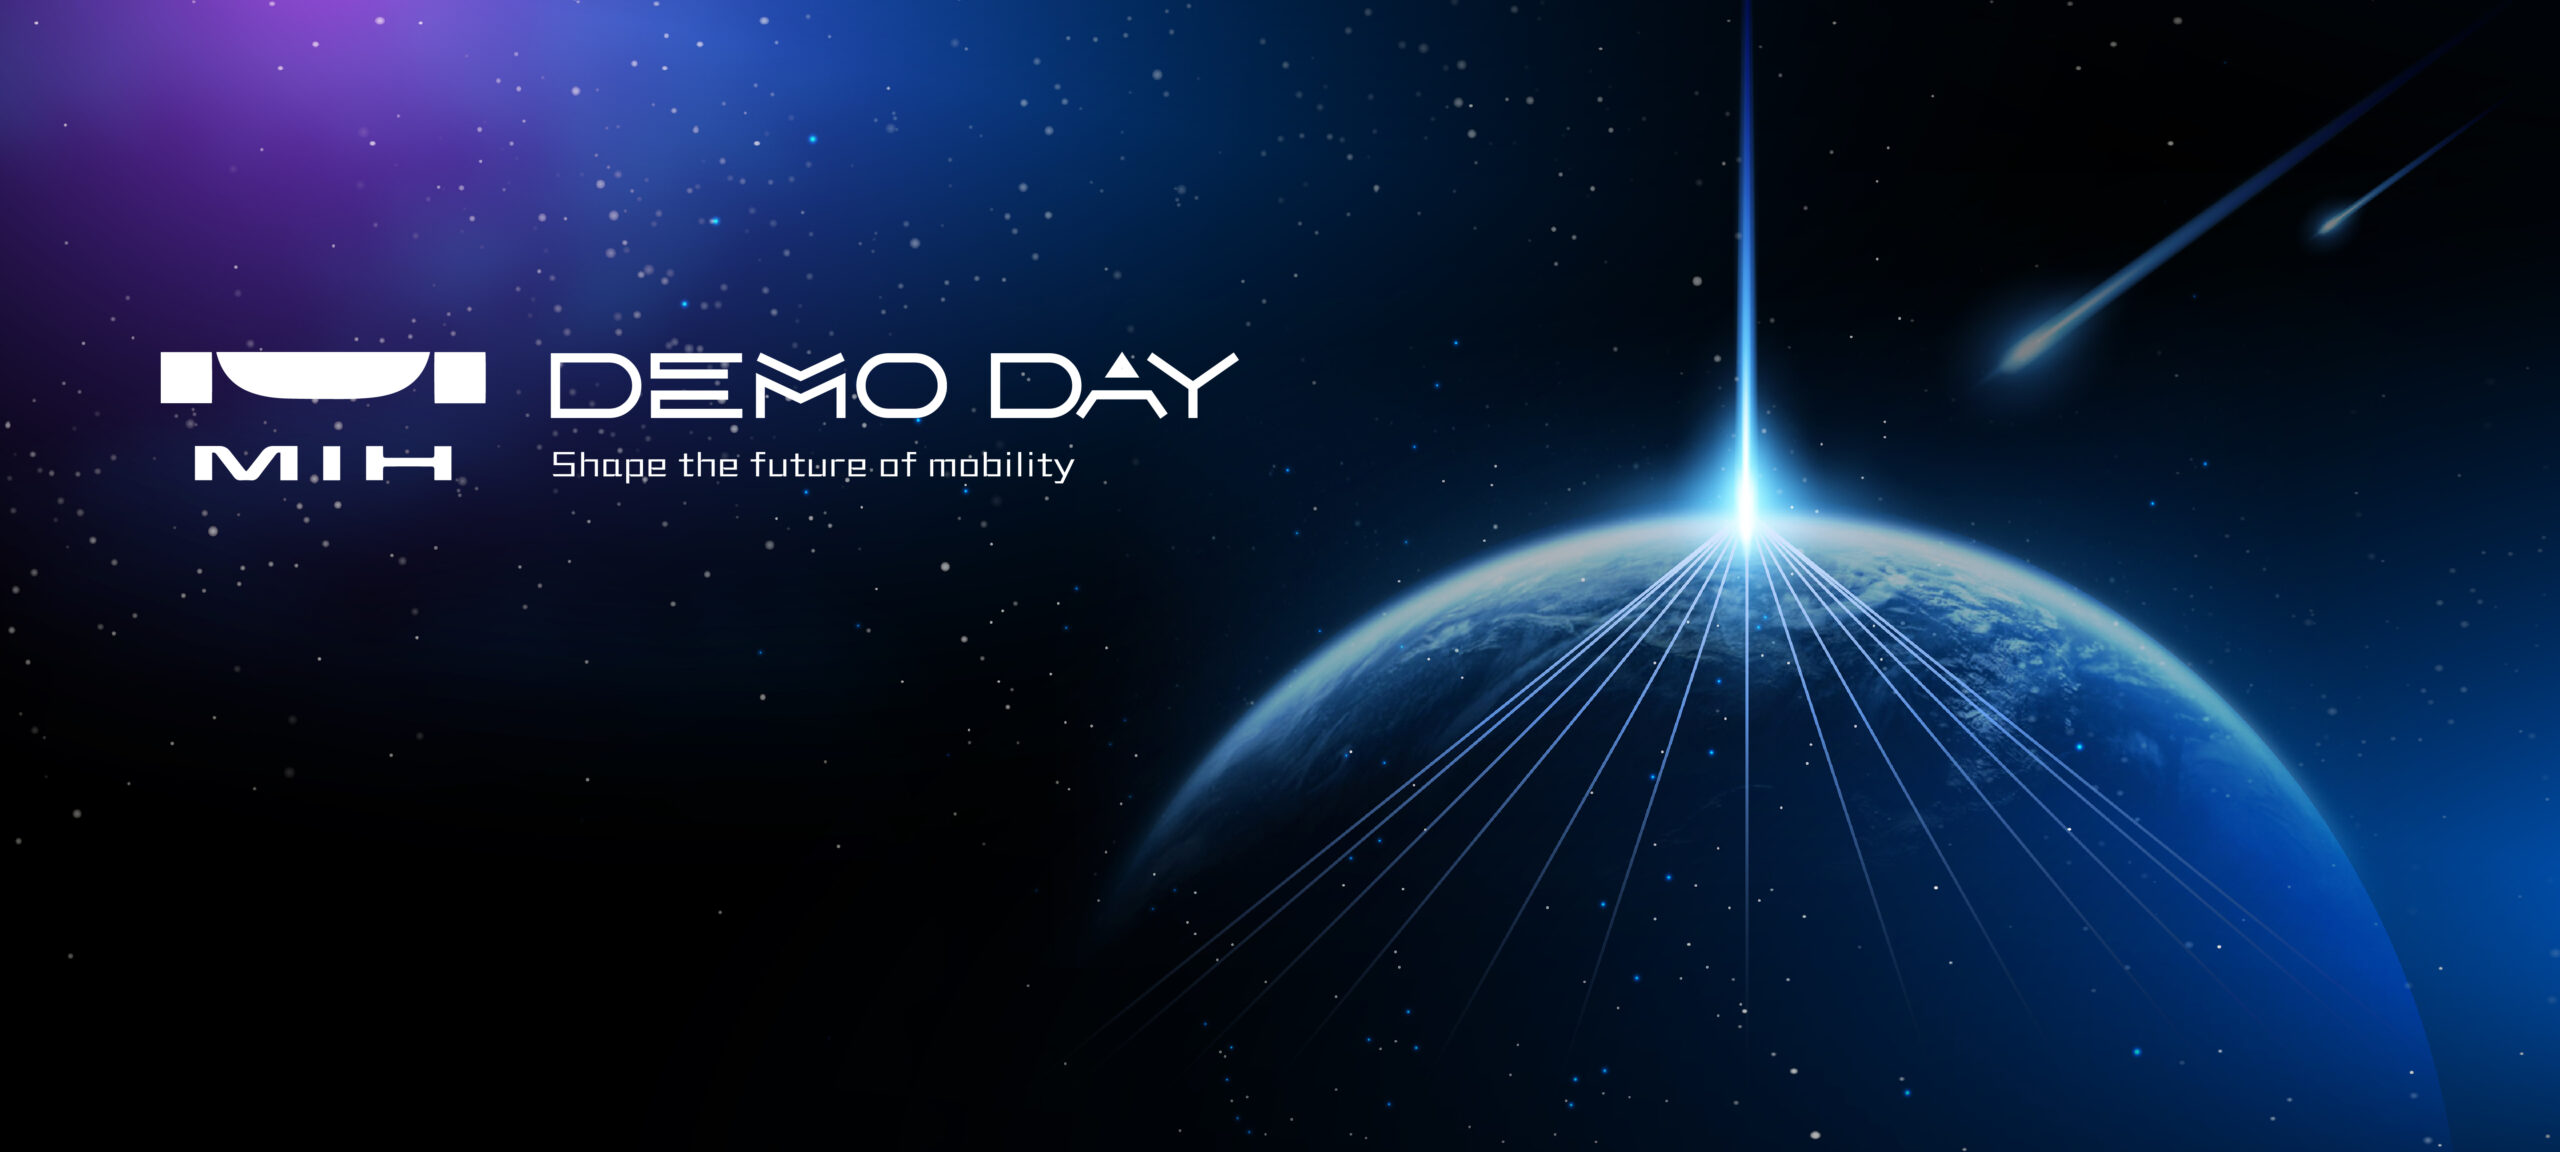 All new MIH platform will be revealed for the first time at MIH Demo Day!